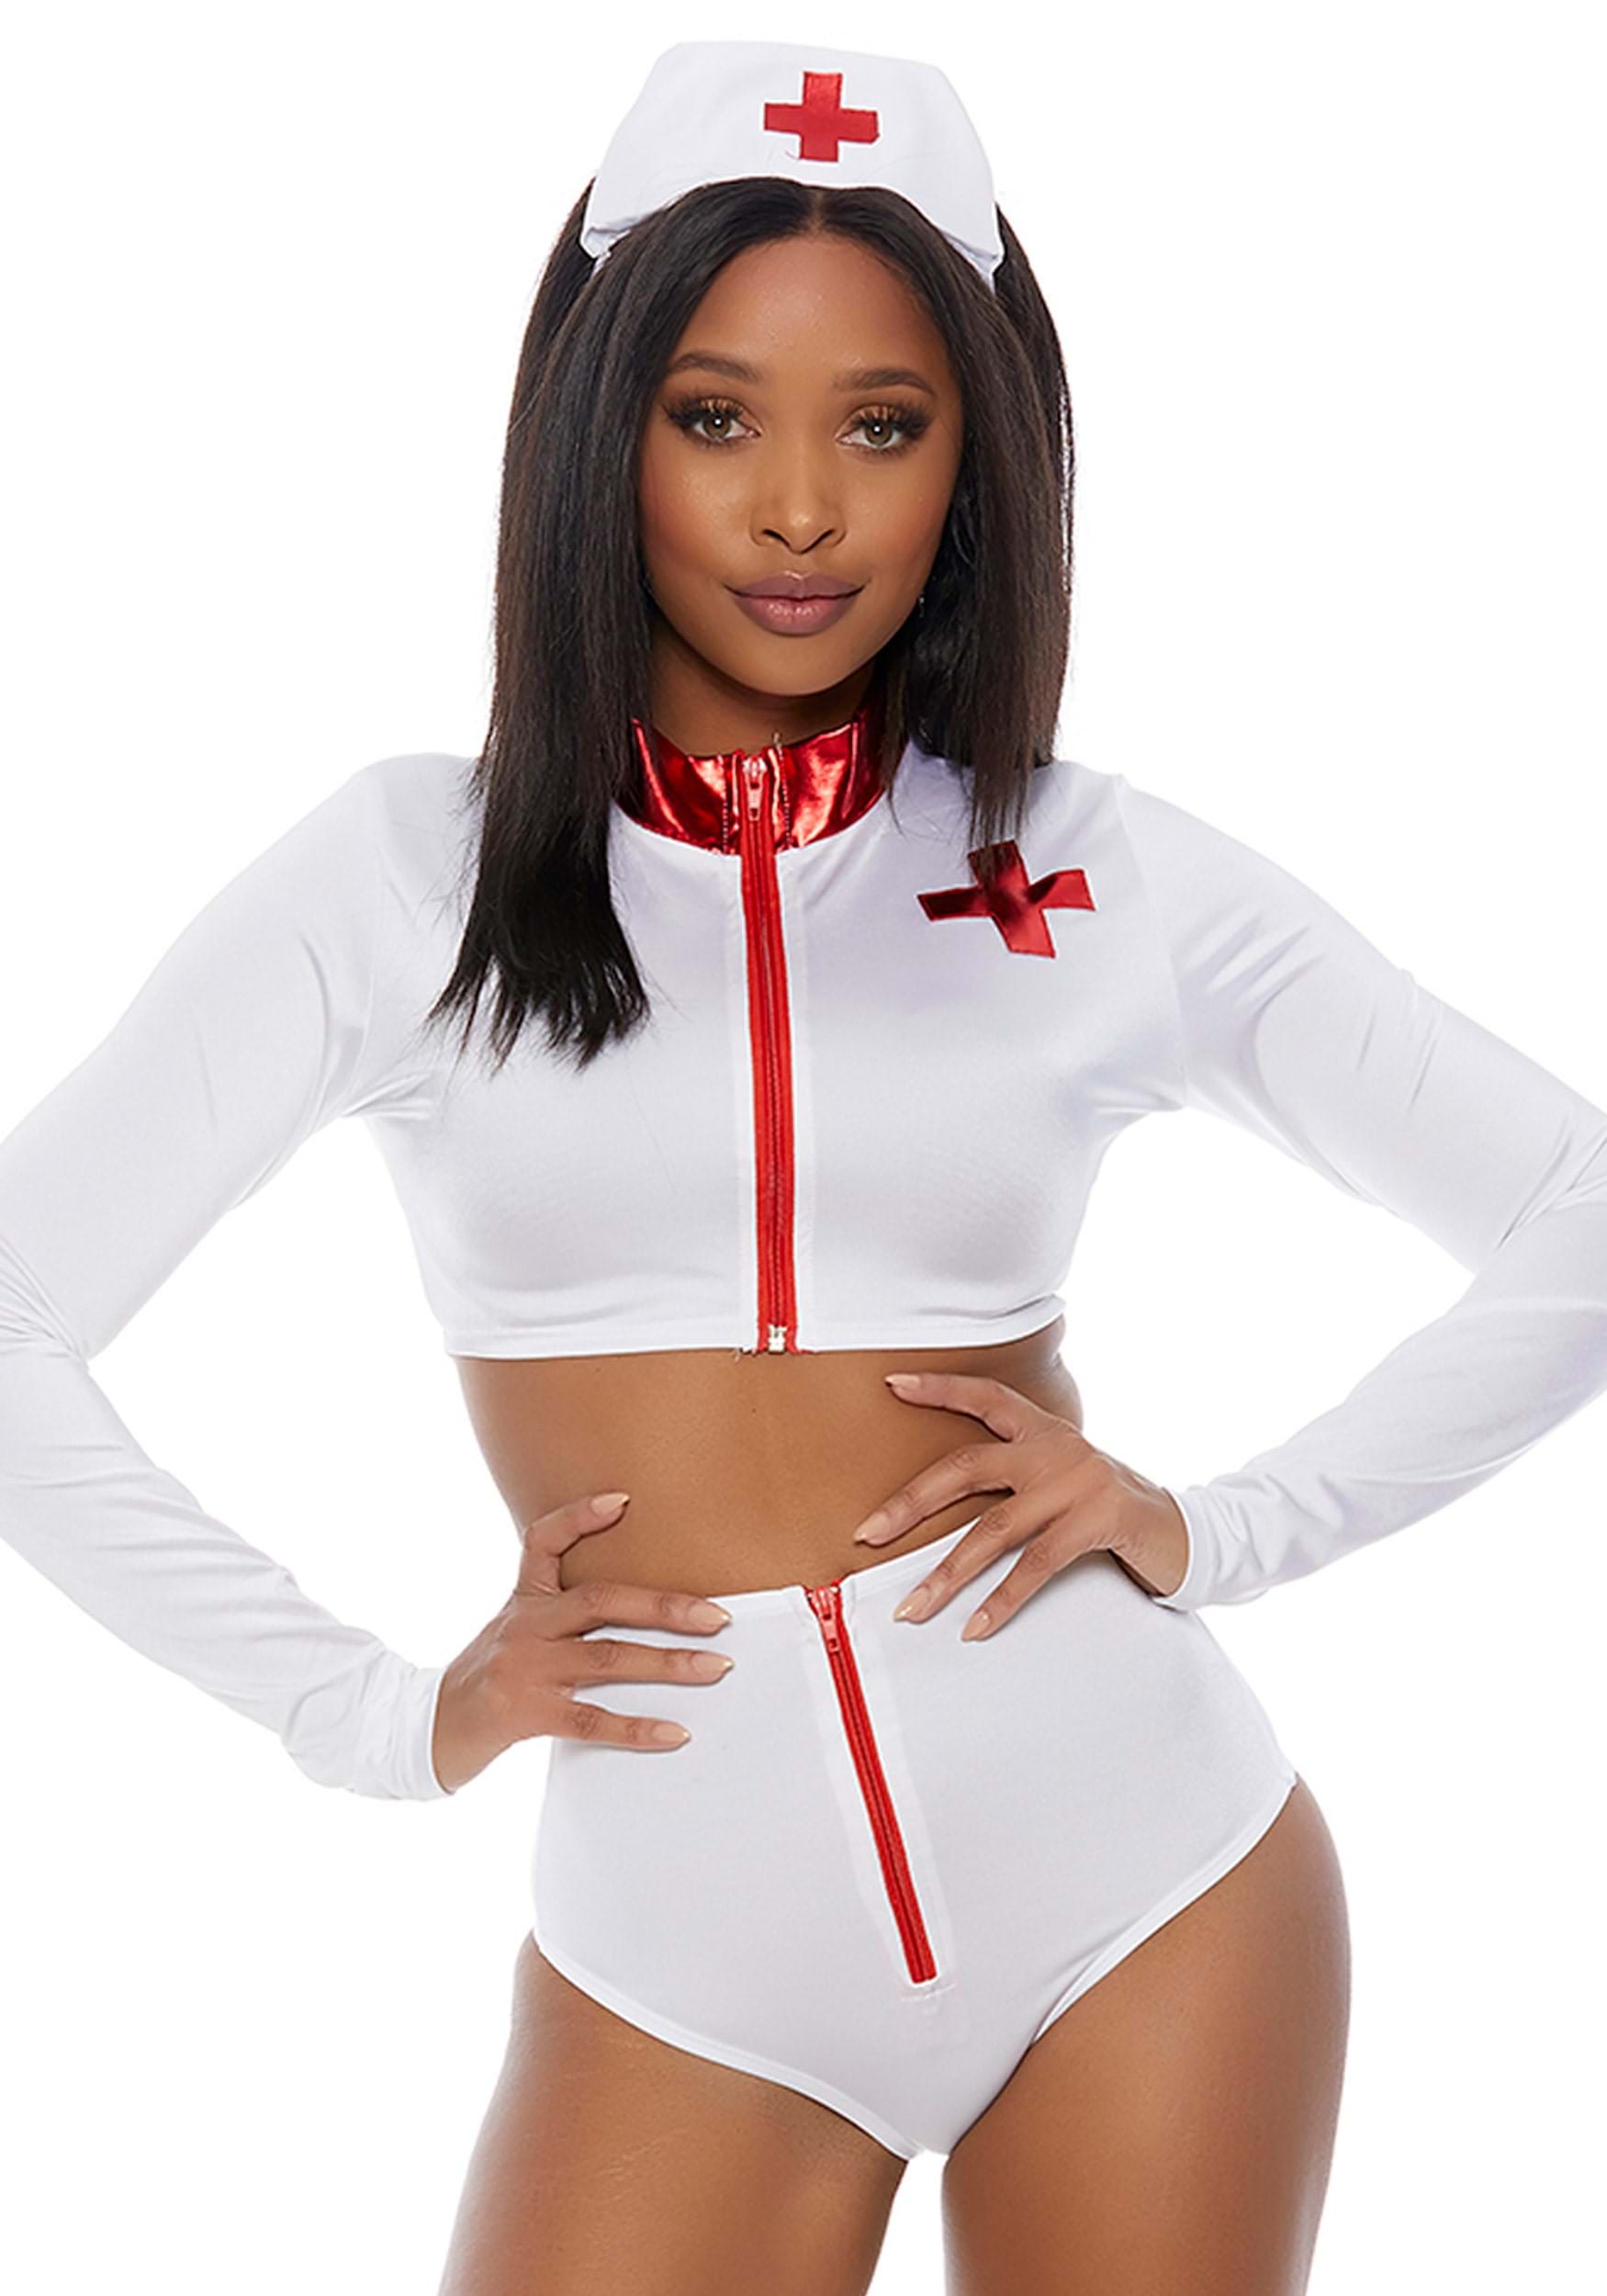 https://images.halloweencostumes.ca/products/72160/1-1/womens-rescue-me-nurse-costume.jpg